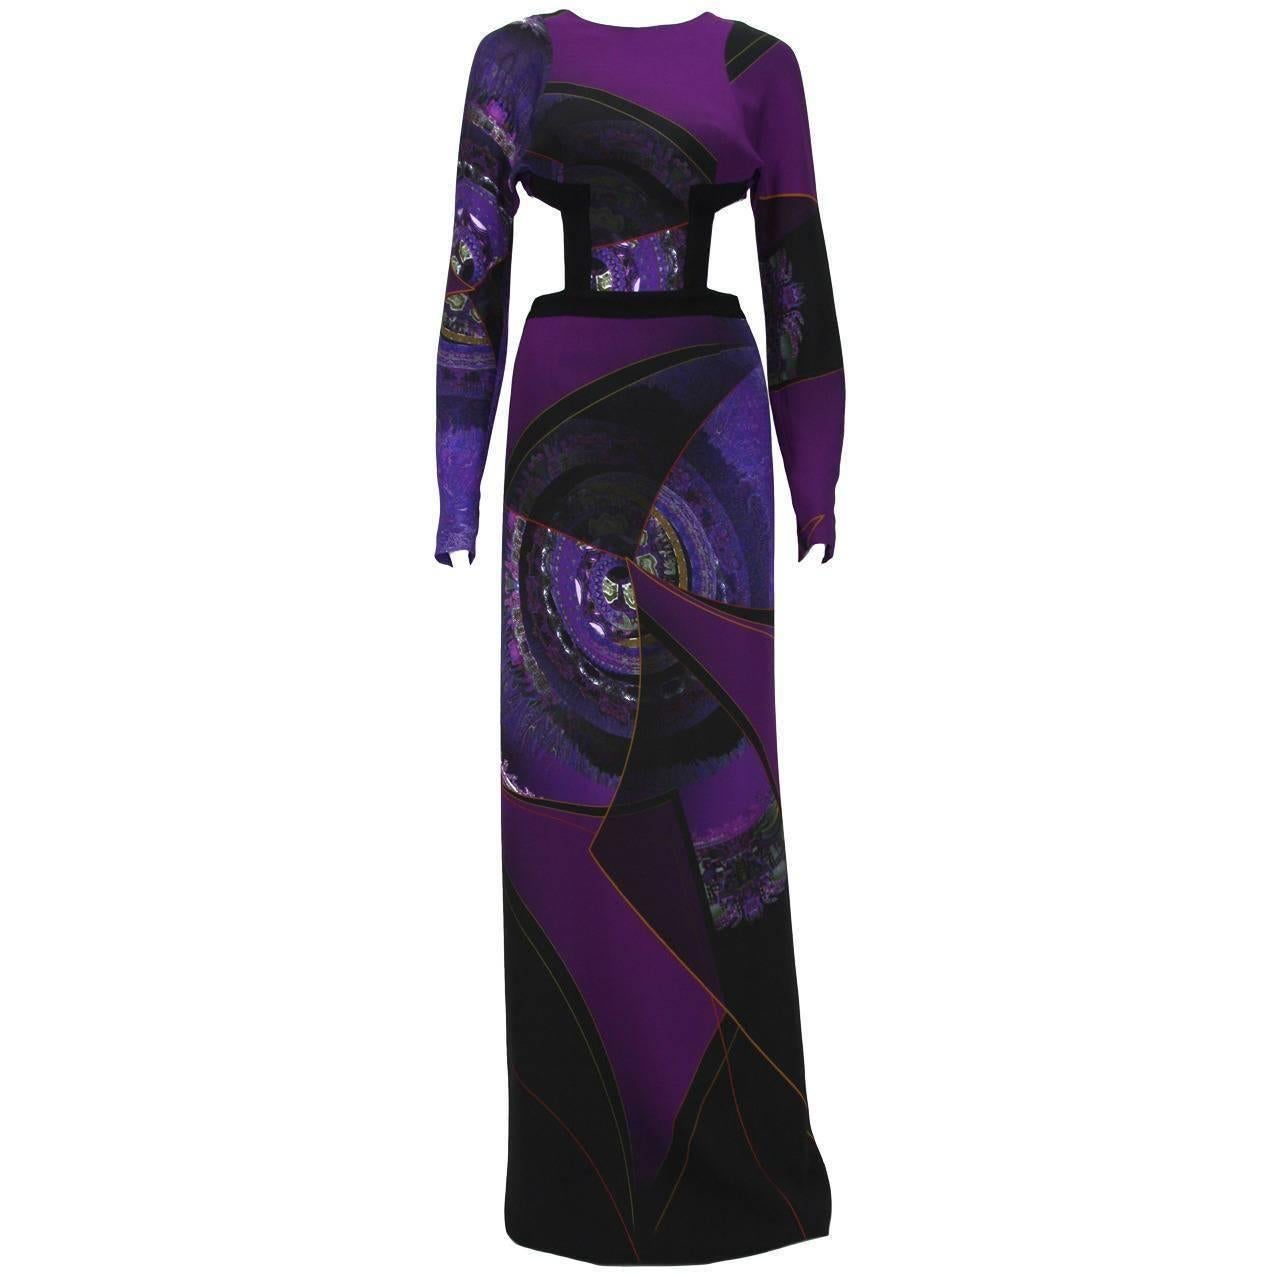 New ETRO RUNWAY Collection Purple Dress Gown
Italian Sizes Available:  40 – US 4, 44 - US 8
Color – Multiple Purple Colors, Black
Open Back Style
Made in Italy
New with Tag.